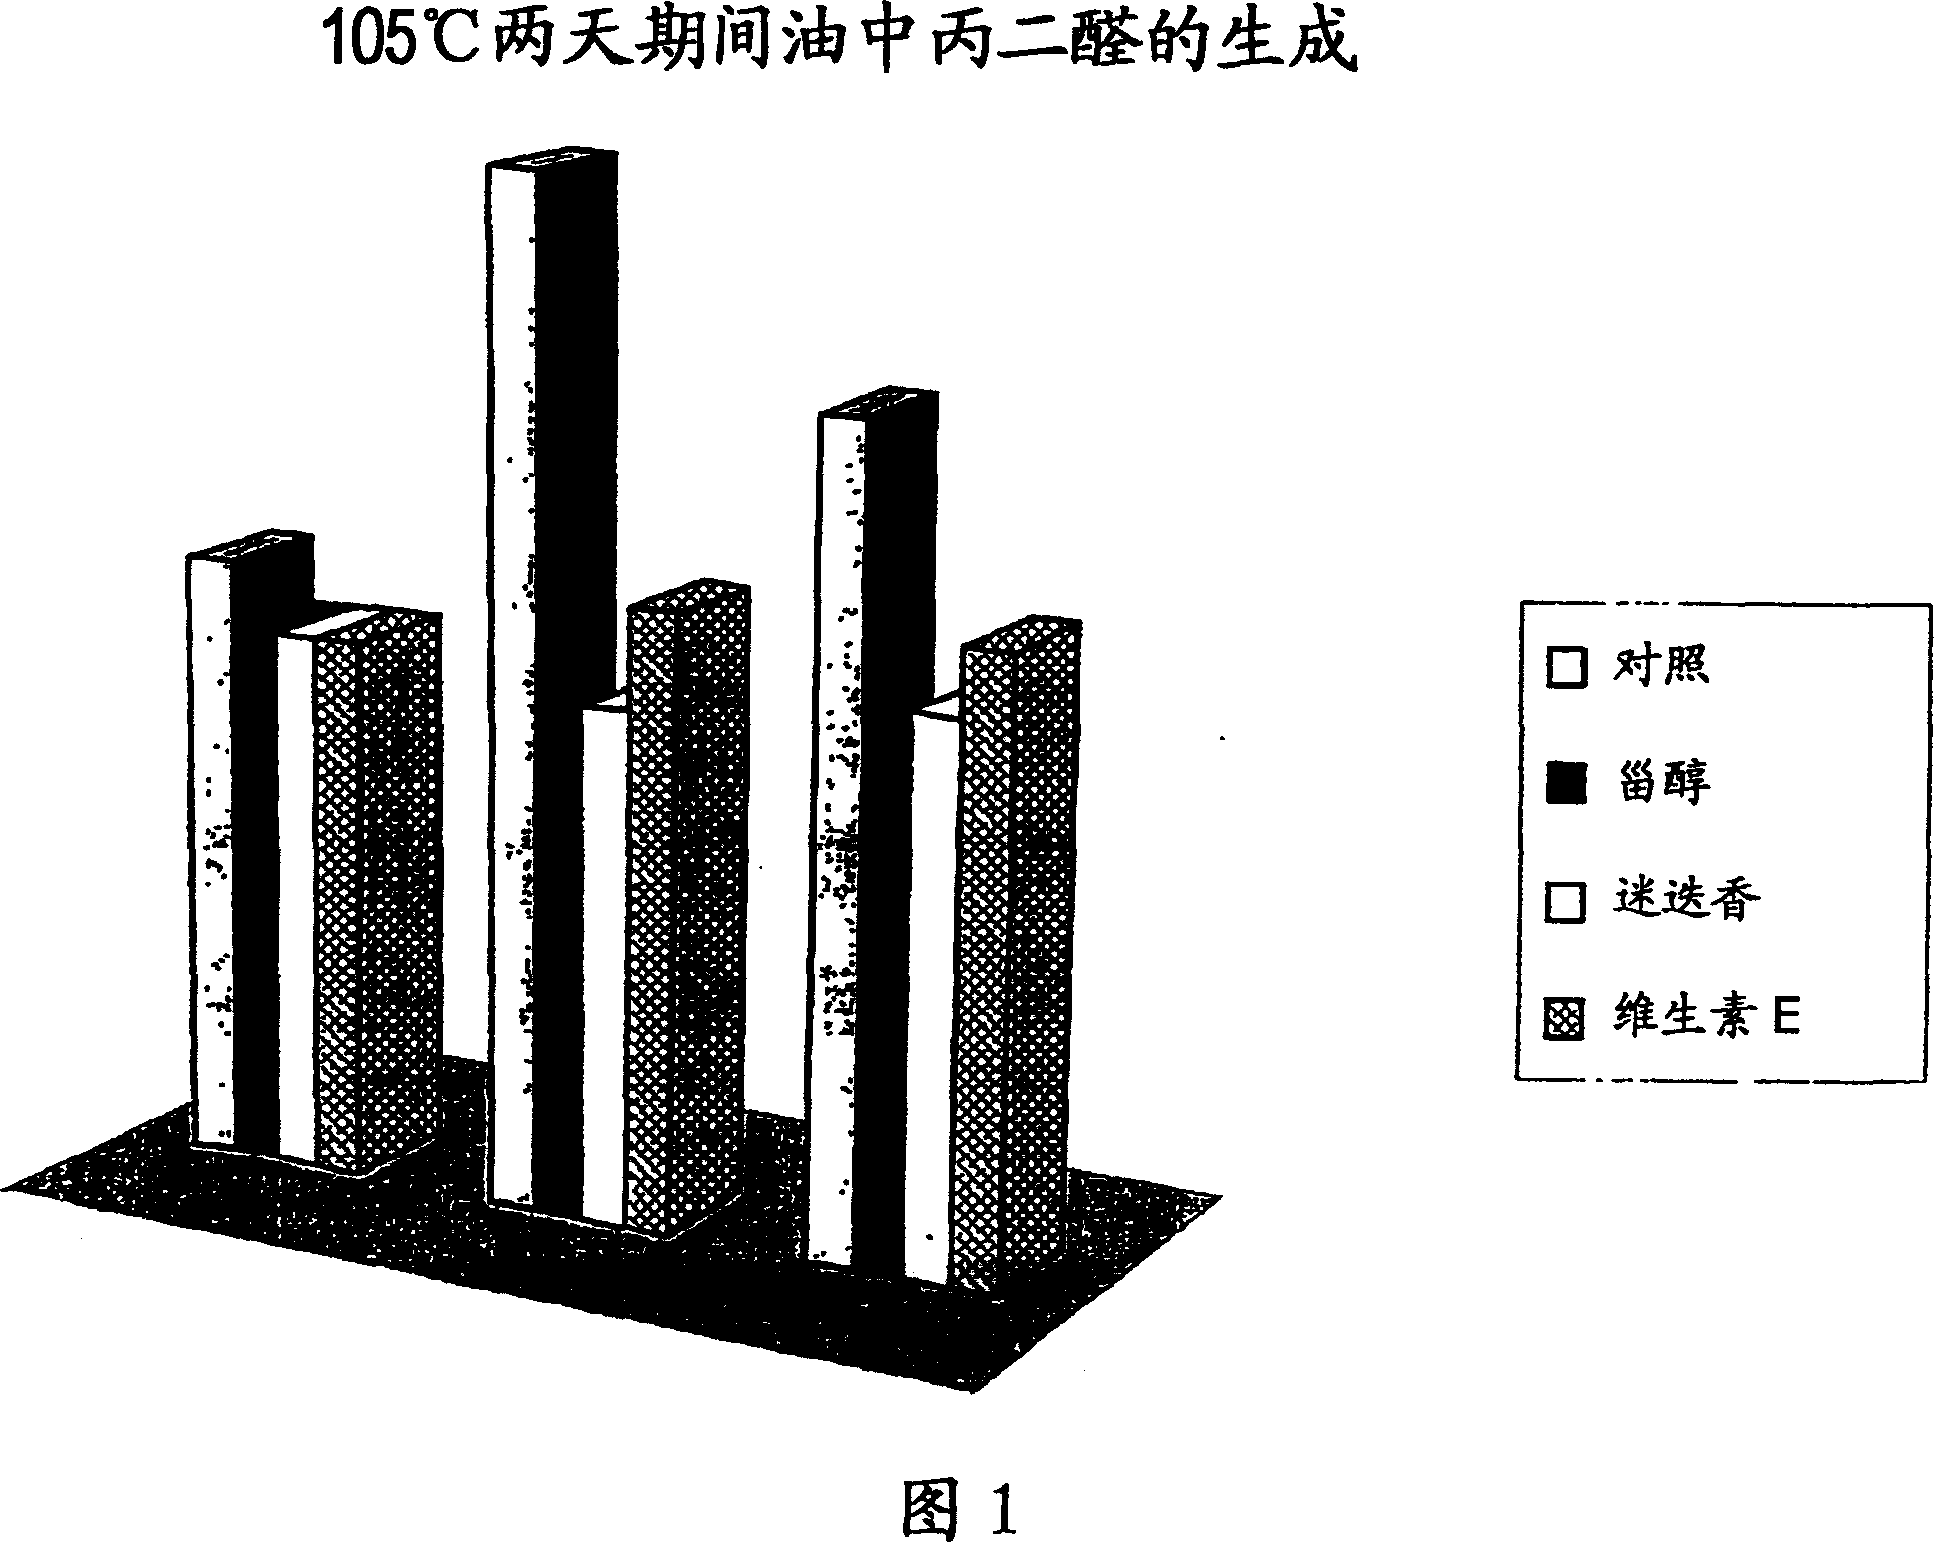 Method of preservation of a food prodcut and composition comprising one or more phytosterols and/or phytostanols useful for this purpose